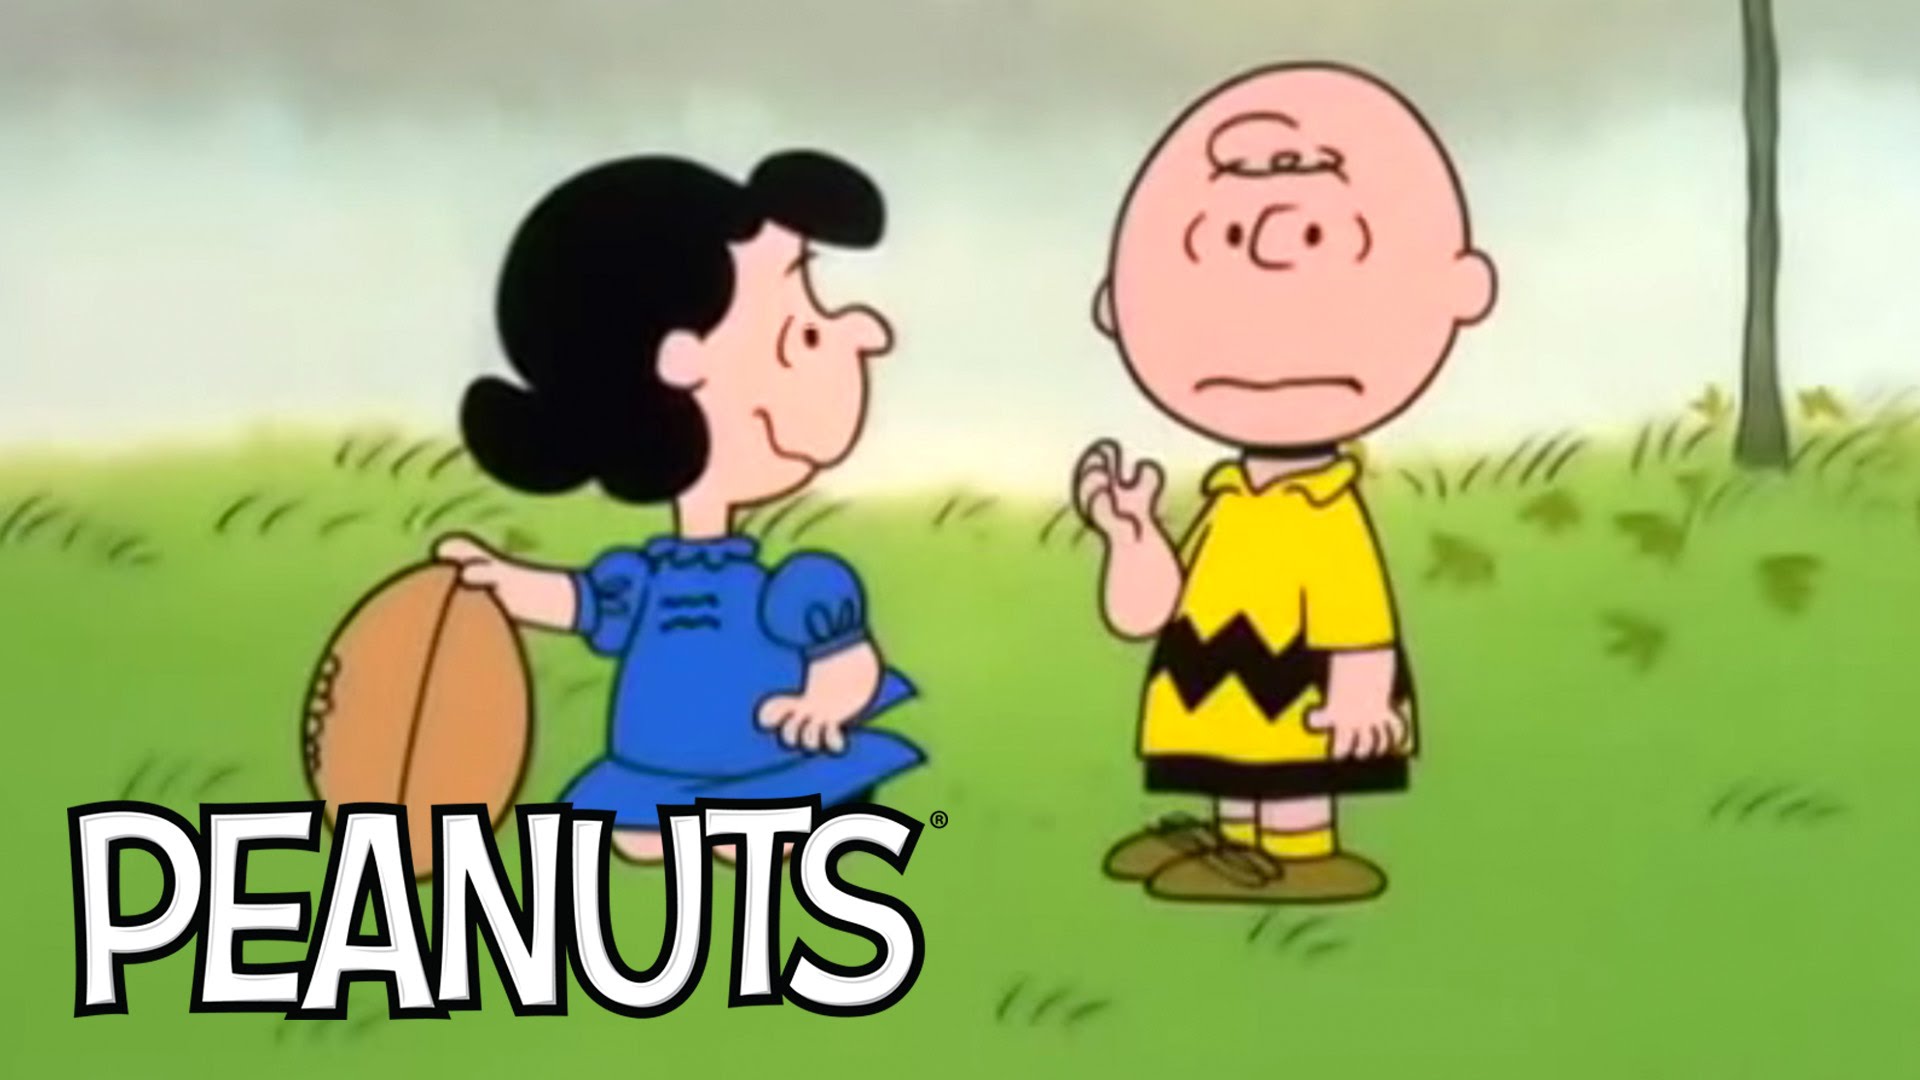 Charlie brown pictures